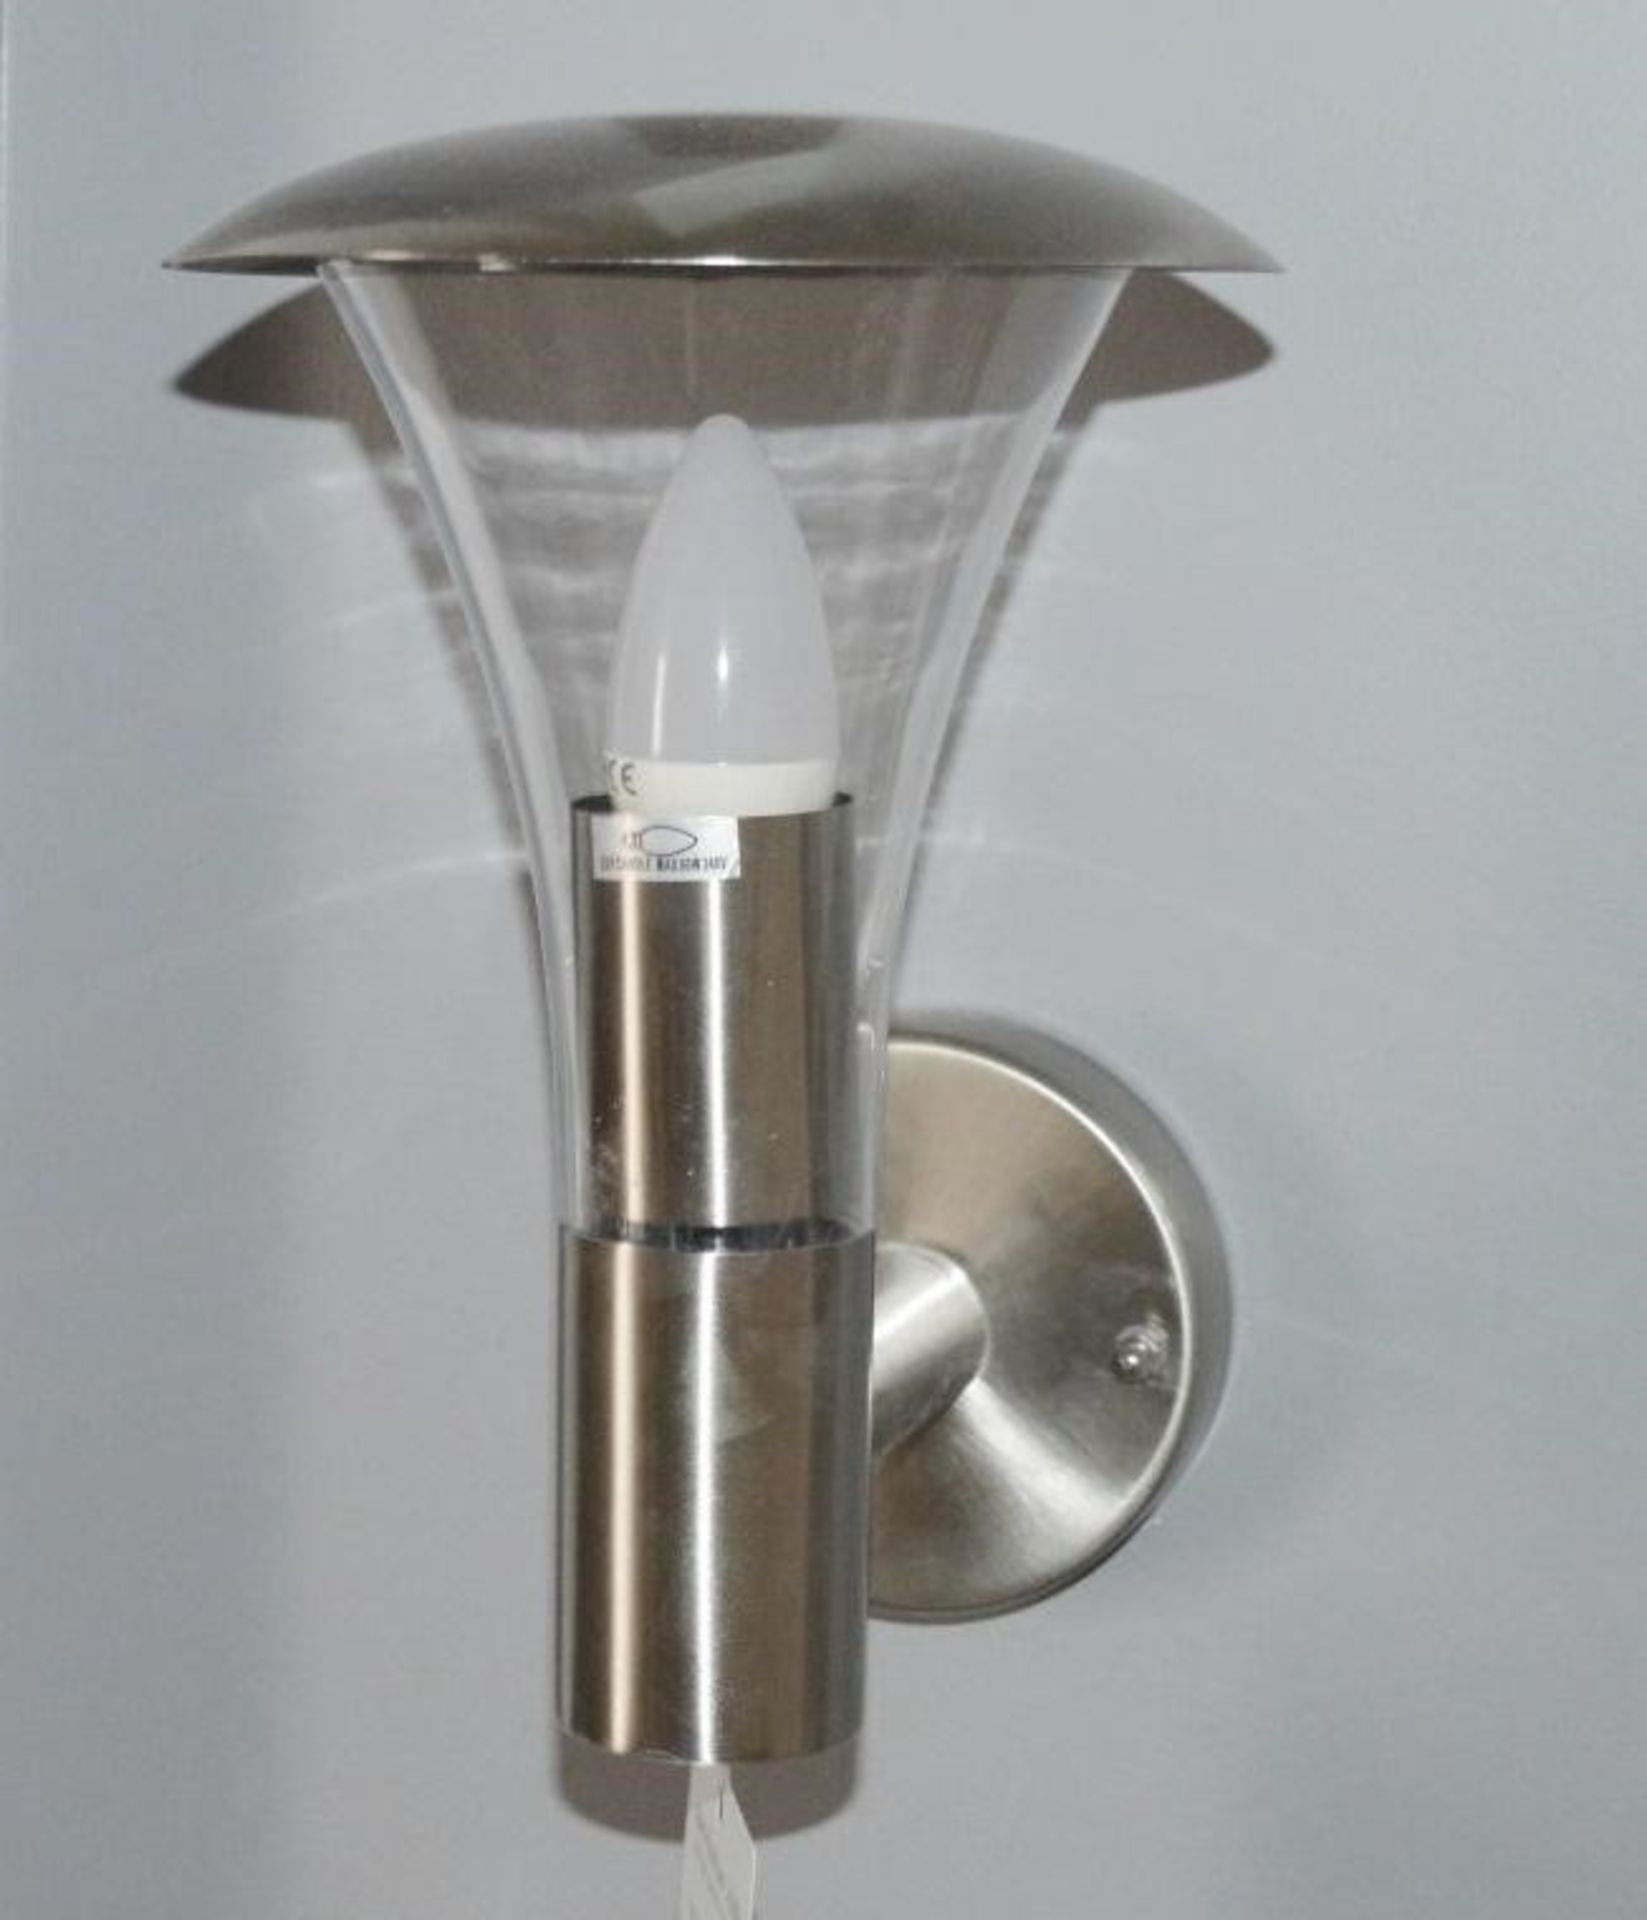 1 x Strand IP44 Stainless Steel Outdoor Wall Light With Clear Polycarbonate Diffuser - Dimensions: 2 - Image 2 of 3